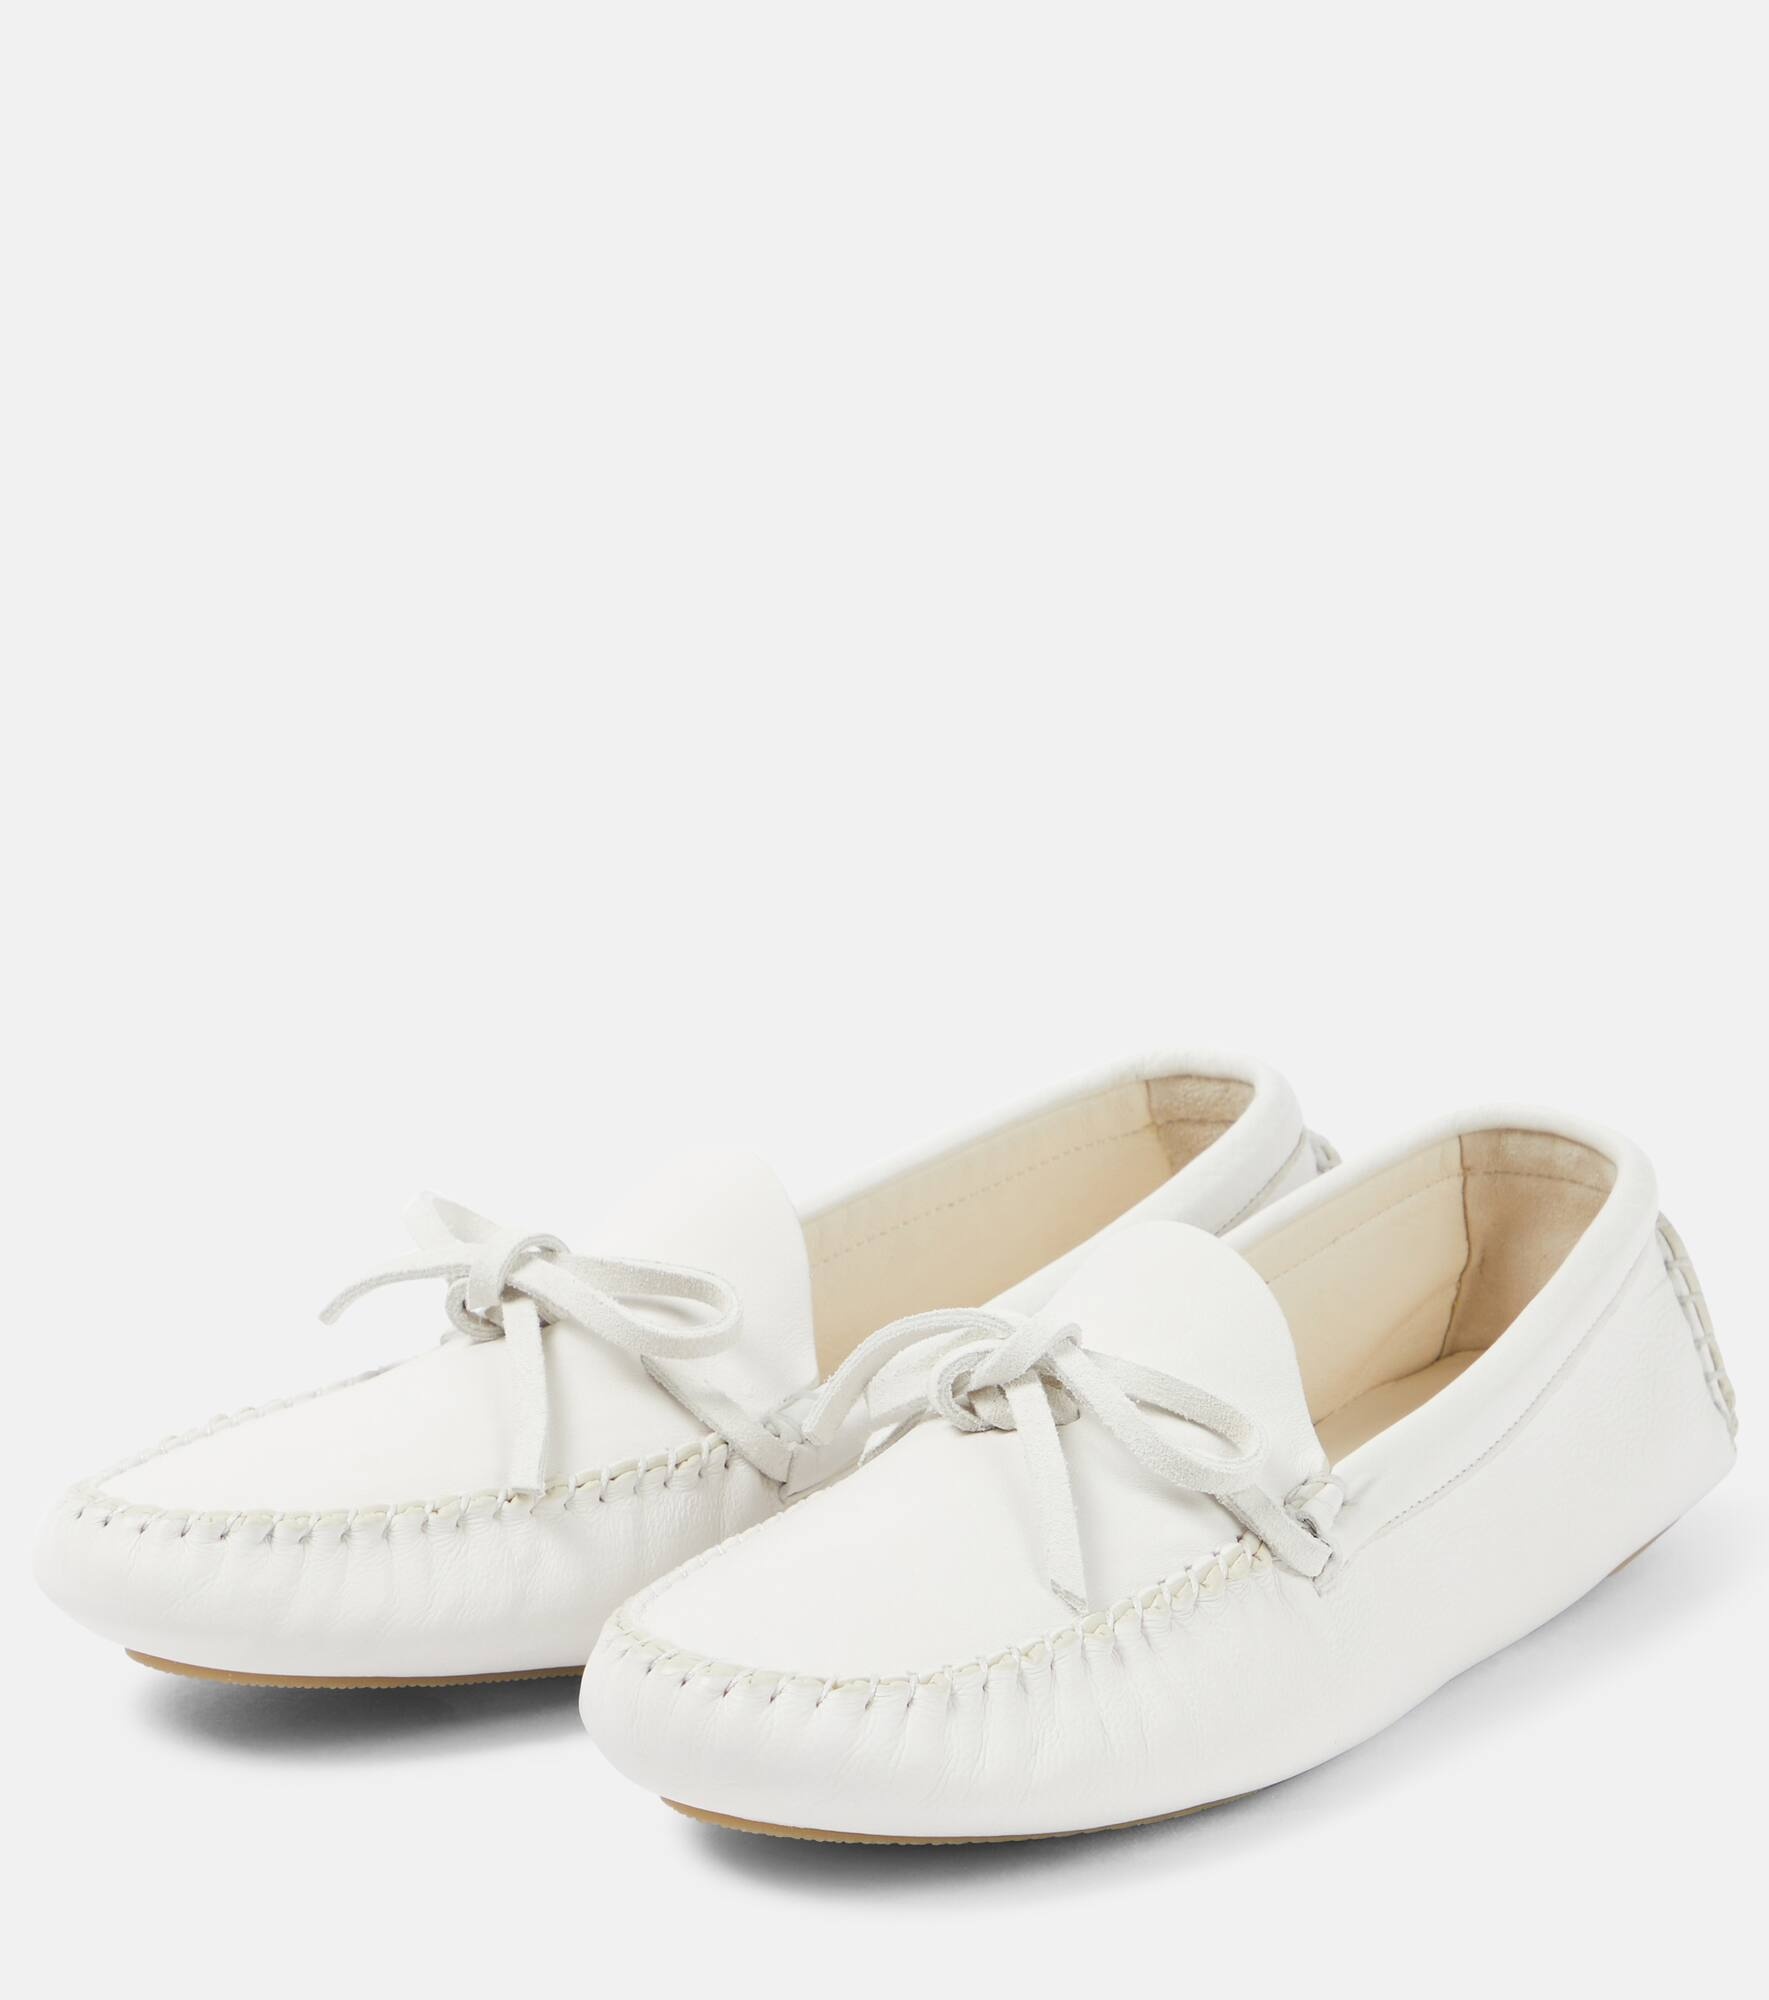 Lucca leather moccasins - 5